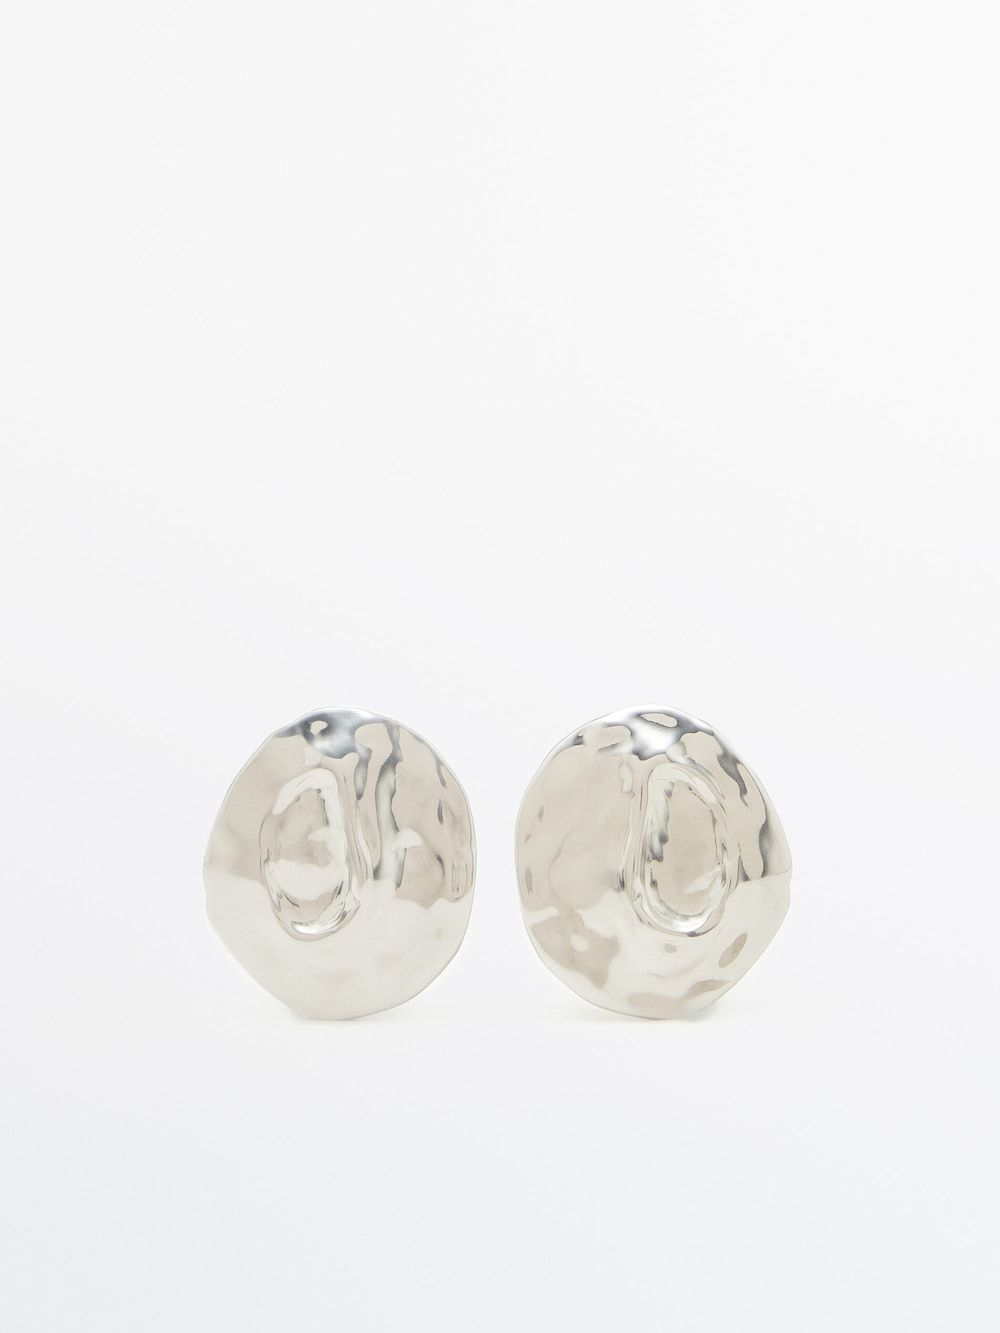 Round textured earrings - Limited Edition | Massimo Dutti UK